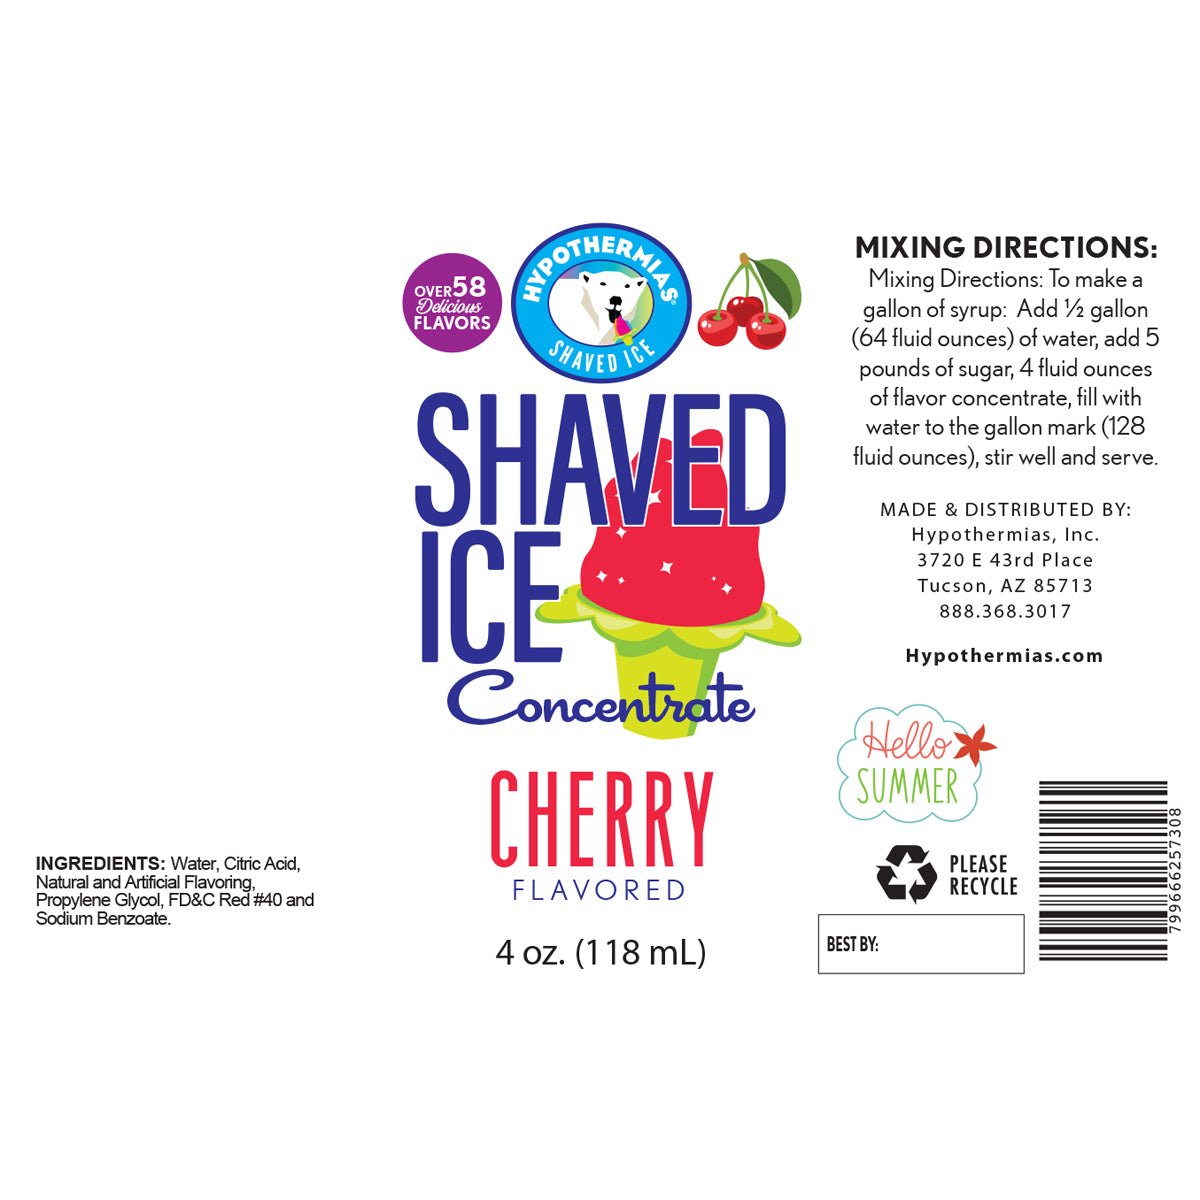 Hypothermias ingredient label for cherry shaved ice or snow cone flavor syrup concentrate